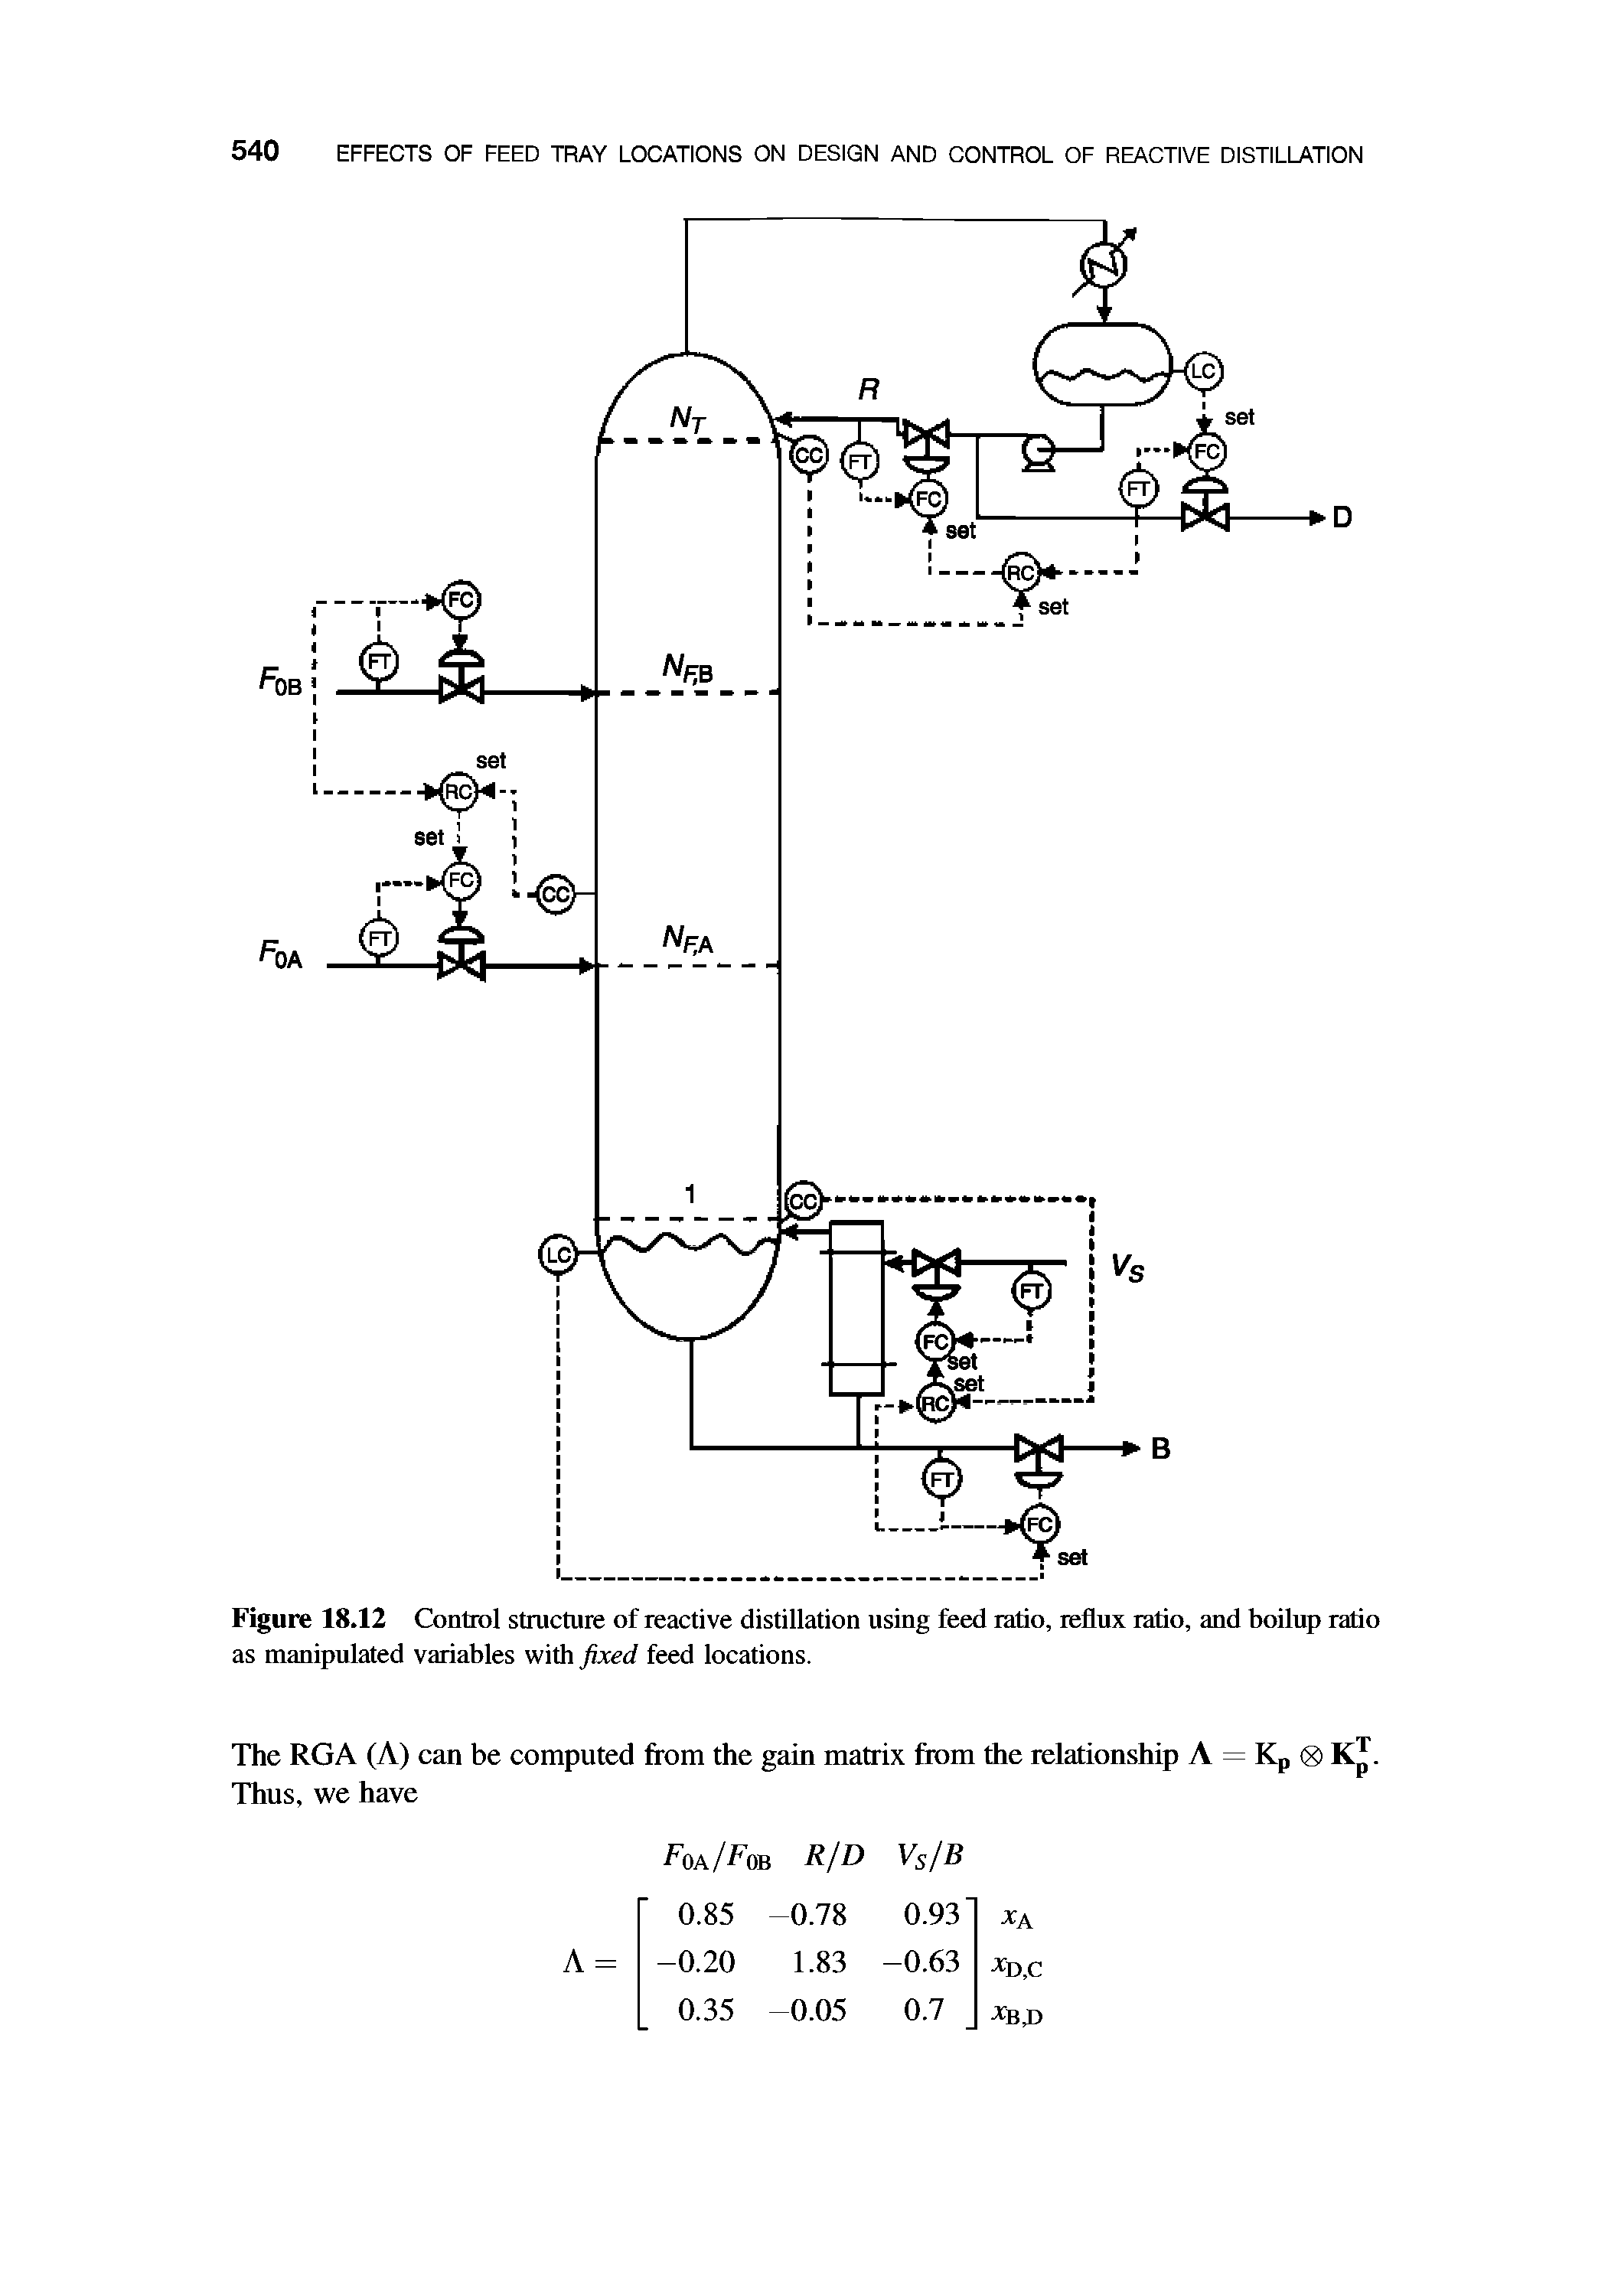 Figure 18.12 Control structure of reactive distillation using feed ratio, reflux ratio, and boilup ratio as manipulated variables with fixed feed locations.